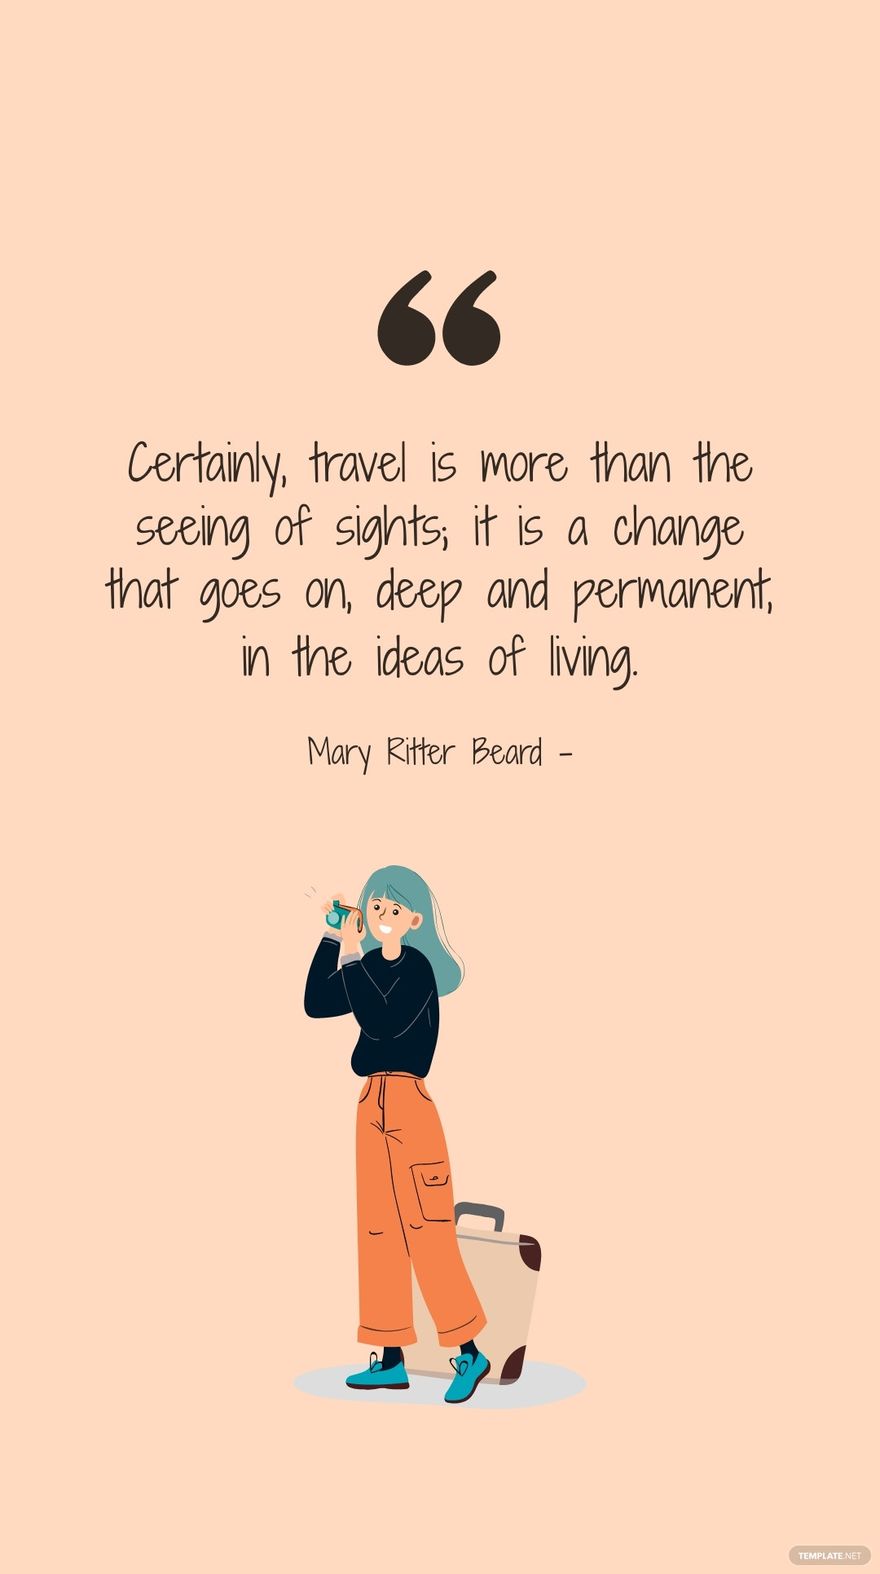 Mary Ritter Beard - Certainly, travel is more than the seeing of sights; it is a change that goes on, deep and permanent, in the ideas of living.